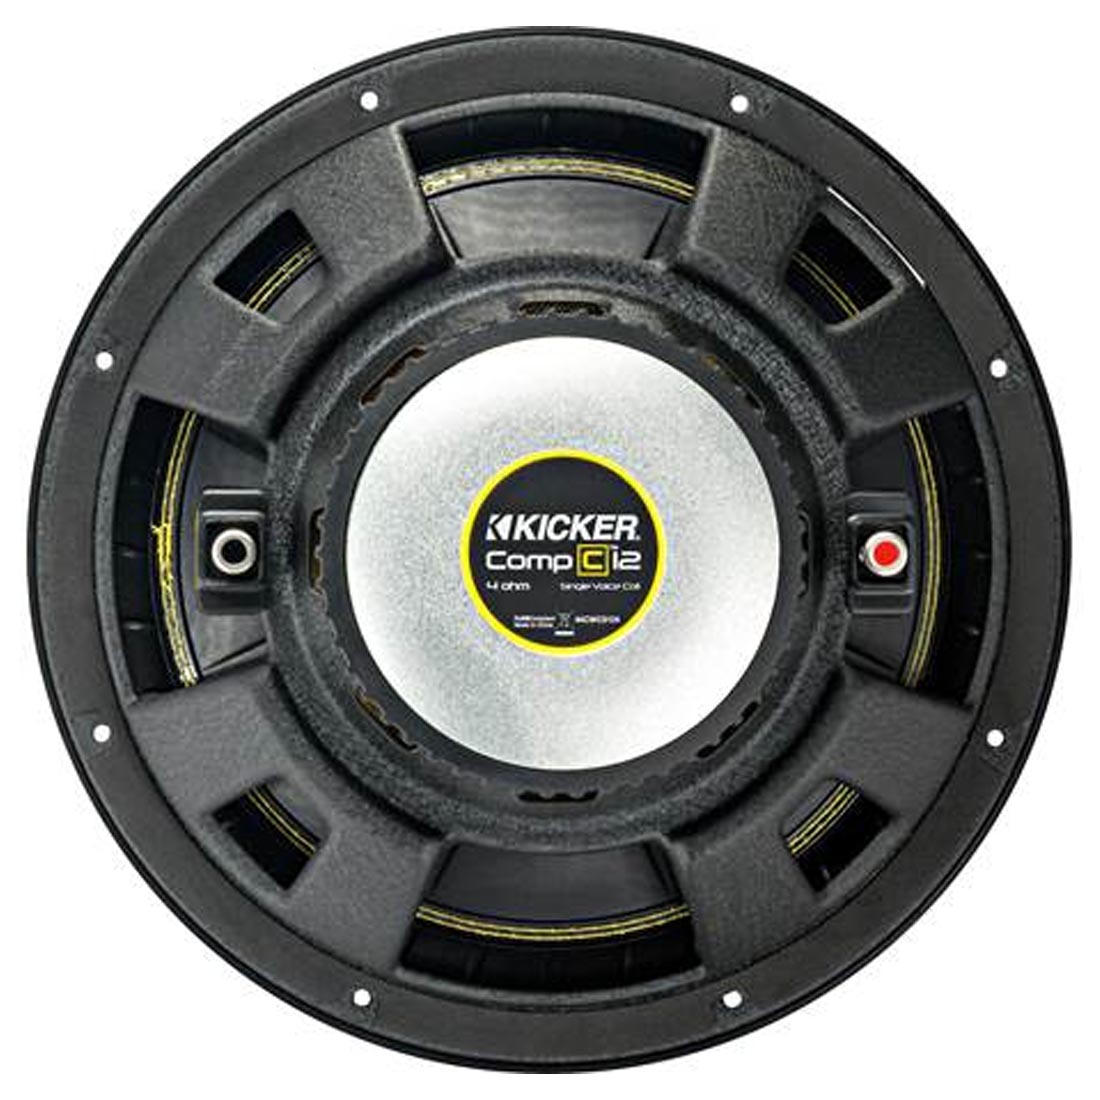 Kicker 44CWCS124 CompC Series 12" 4-Ohm Subwoofer